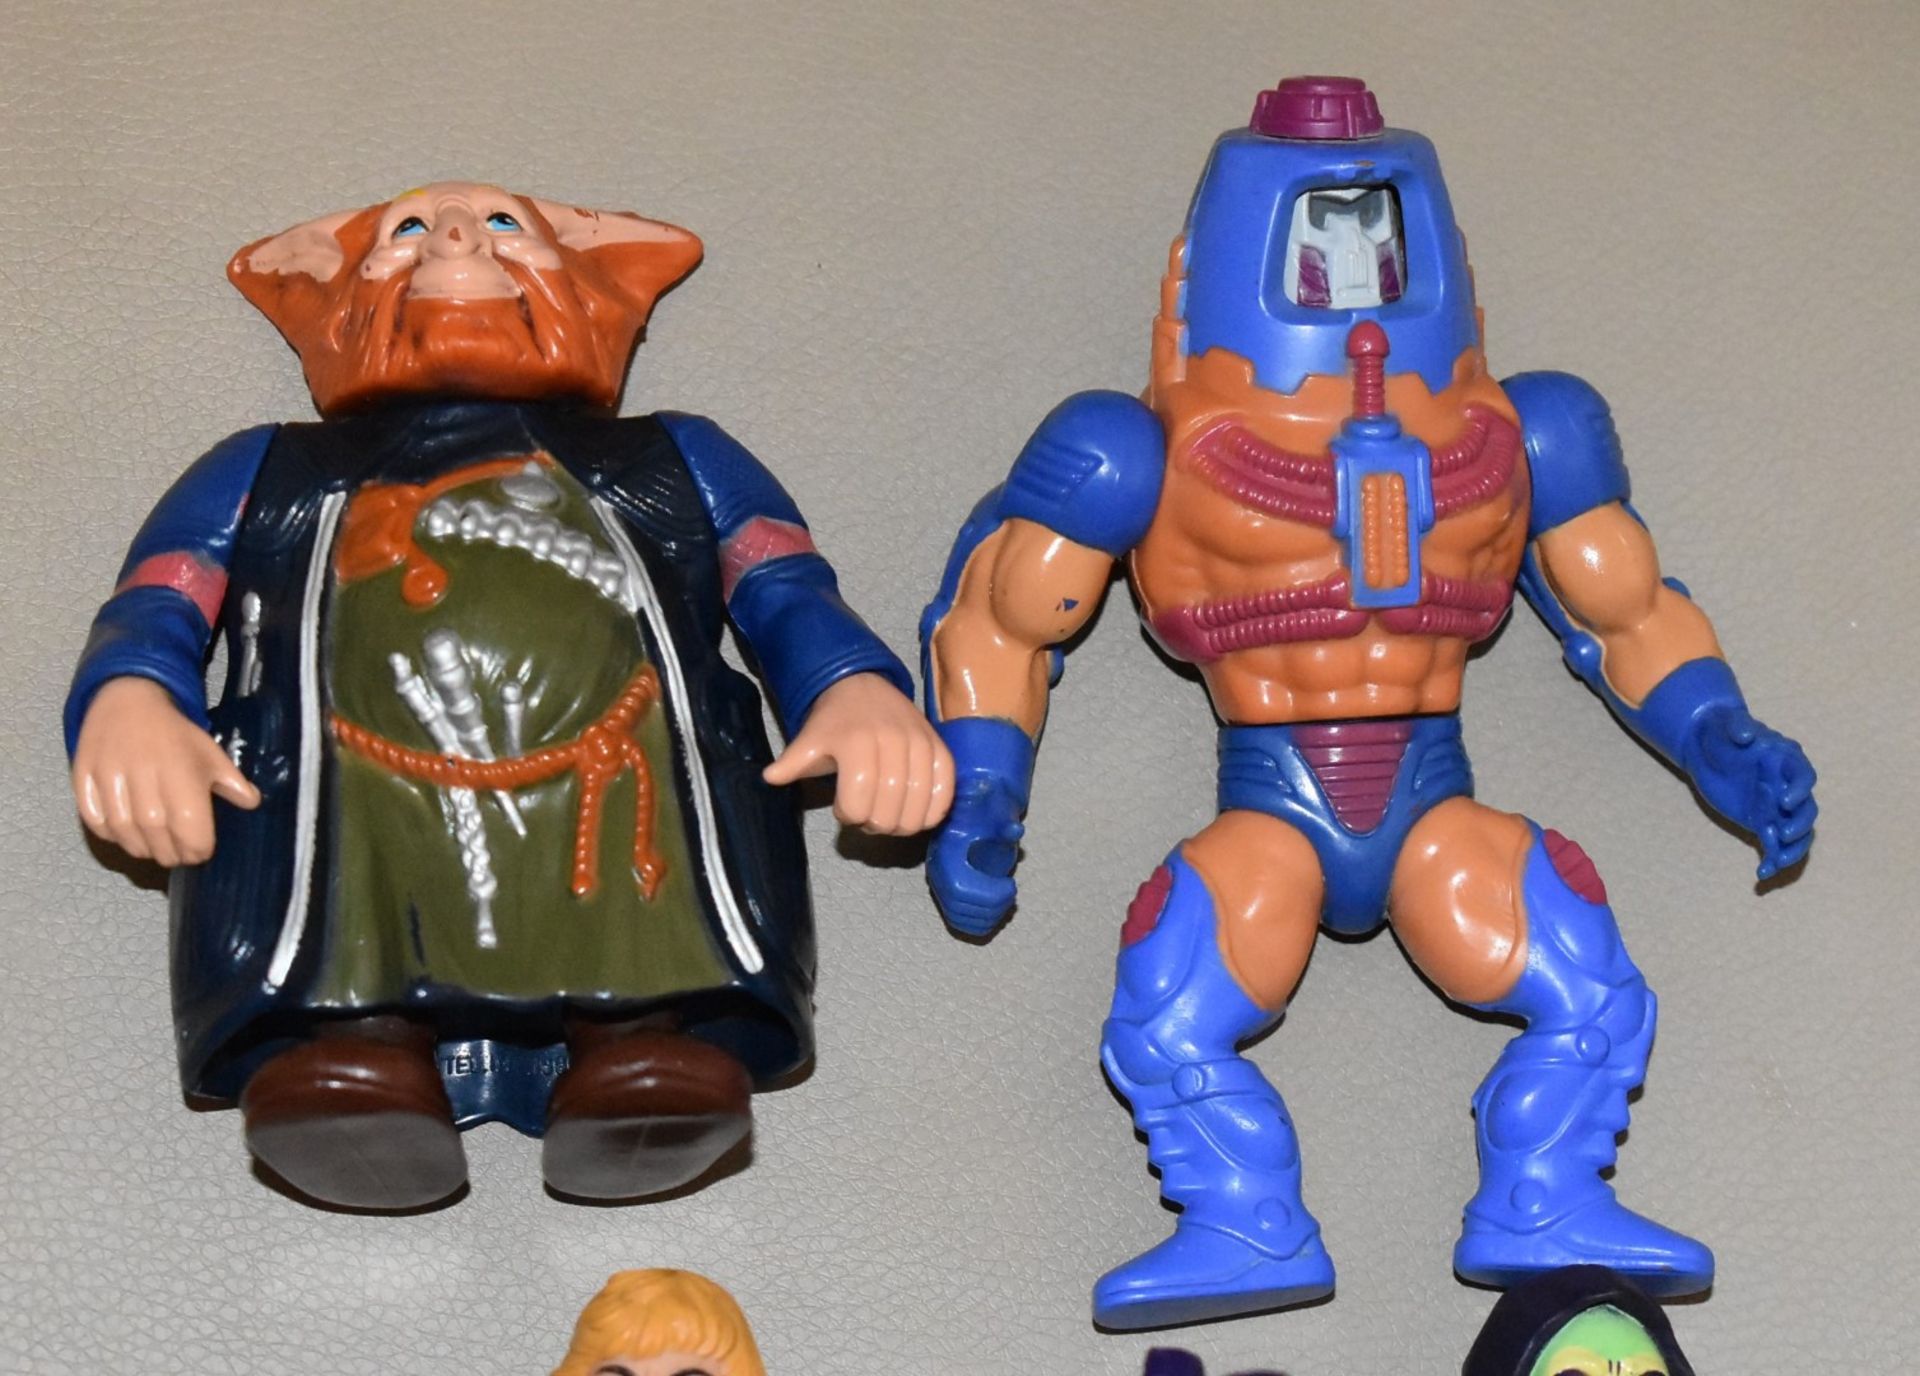 8 x Vintage He-Man Masters of the Universe Figures - Includes Some Original Accessories - Image 4 of 7